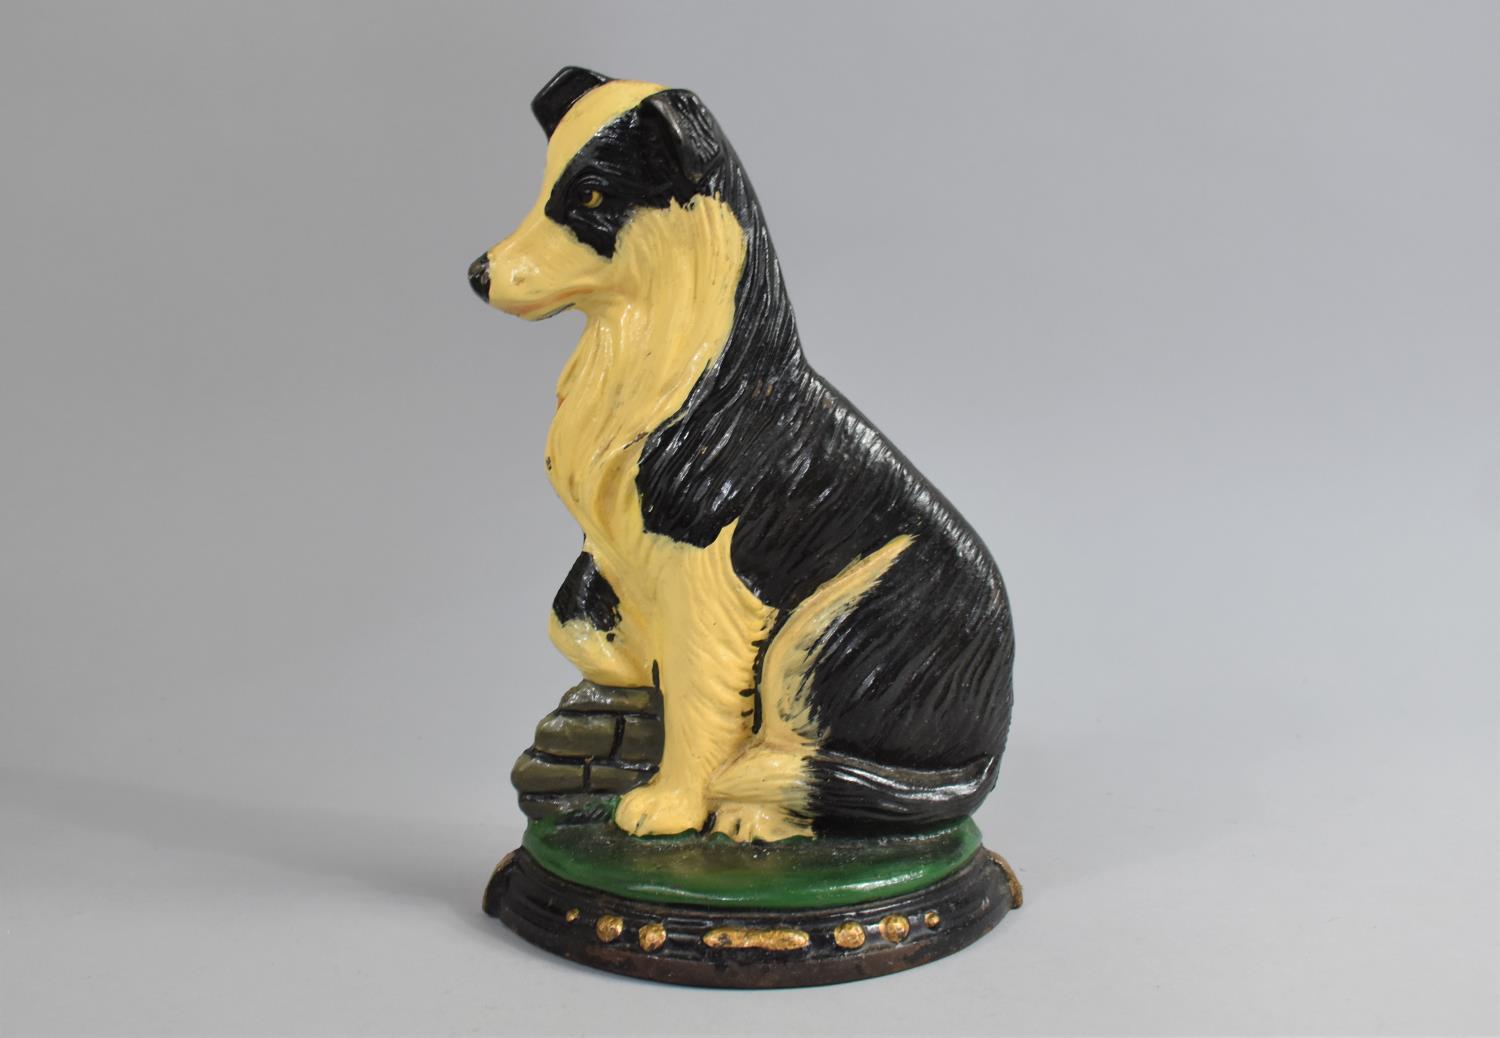 A Modern Painted Cased Iron Doorstop in the Form of Seated Sheepdog by Minster, 25cm high